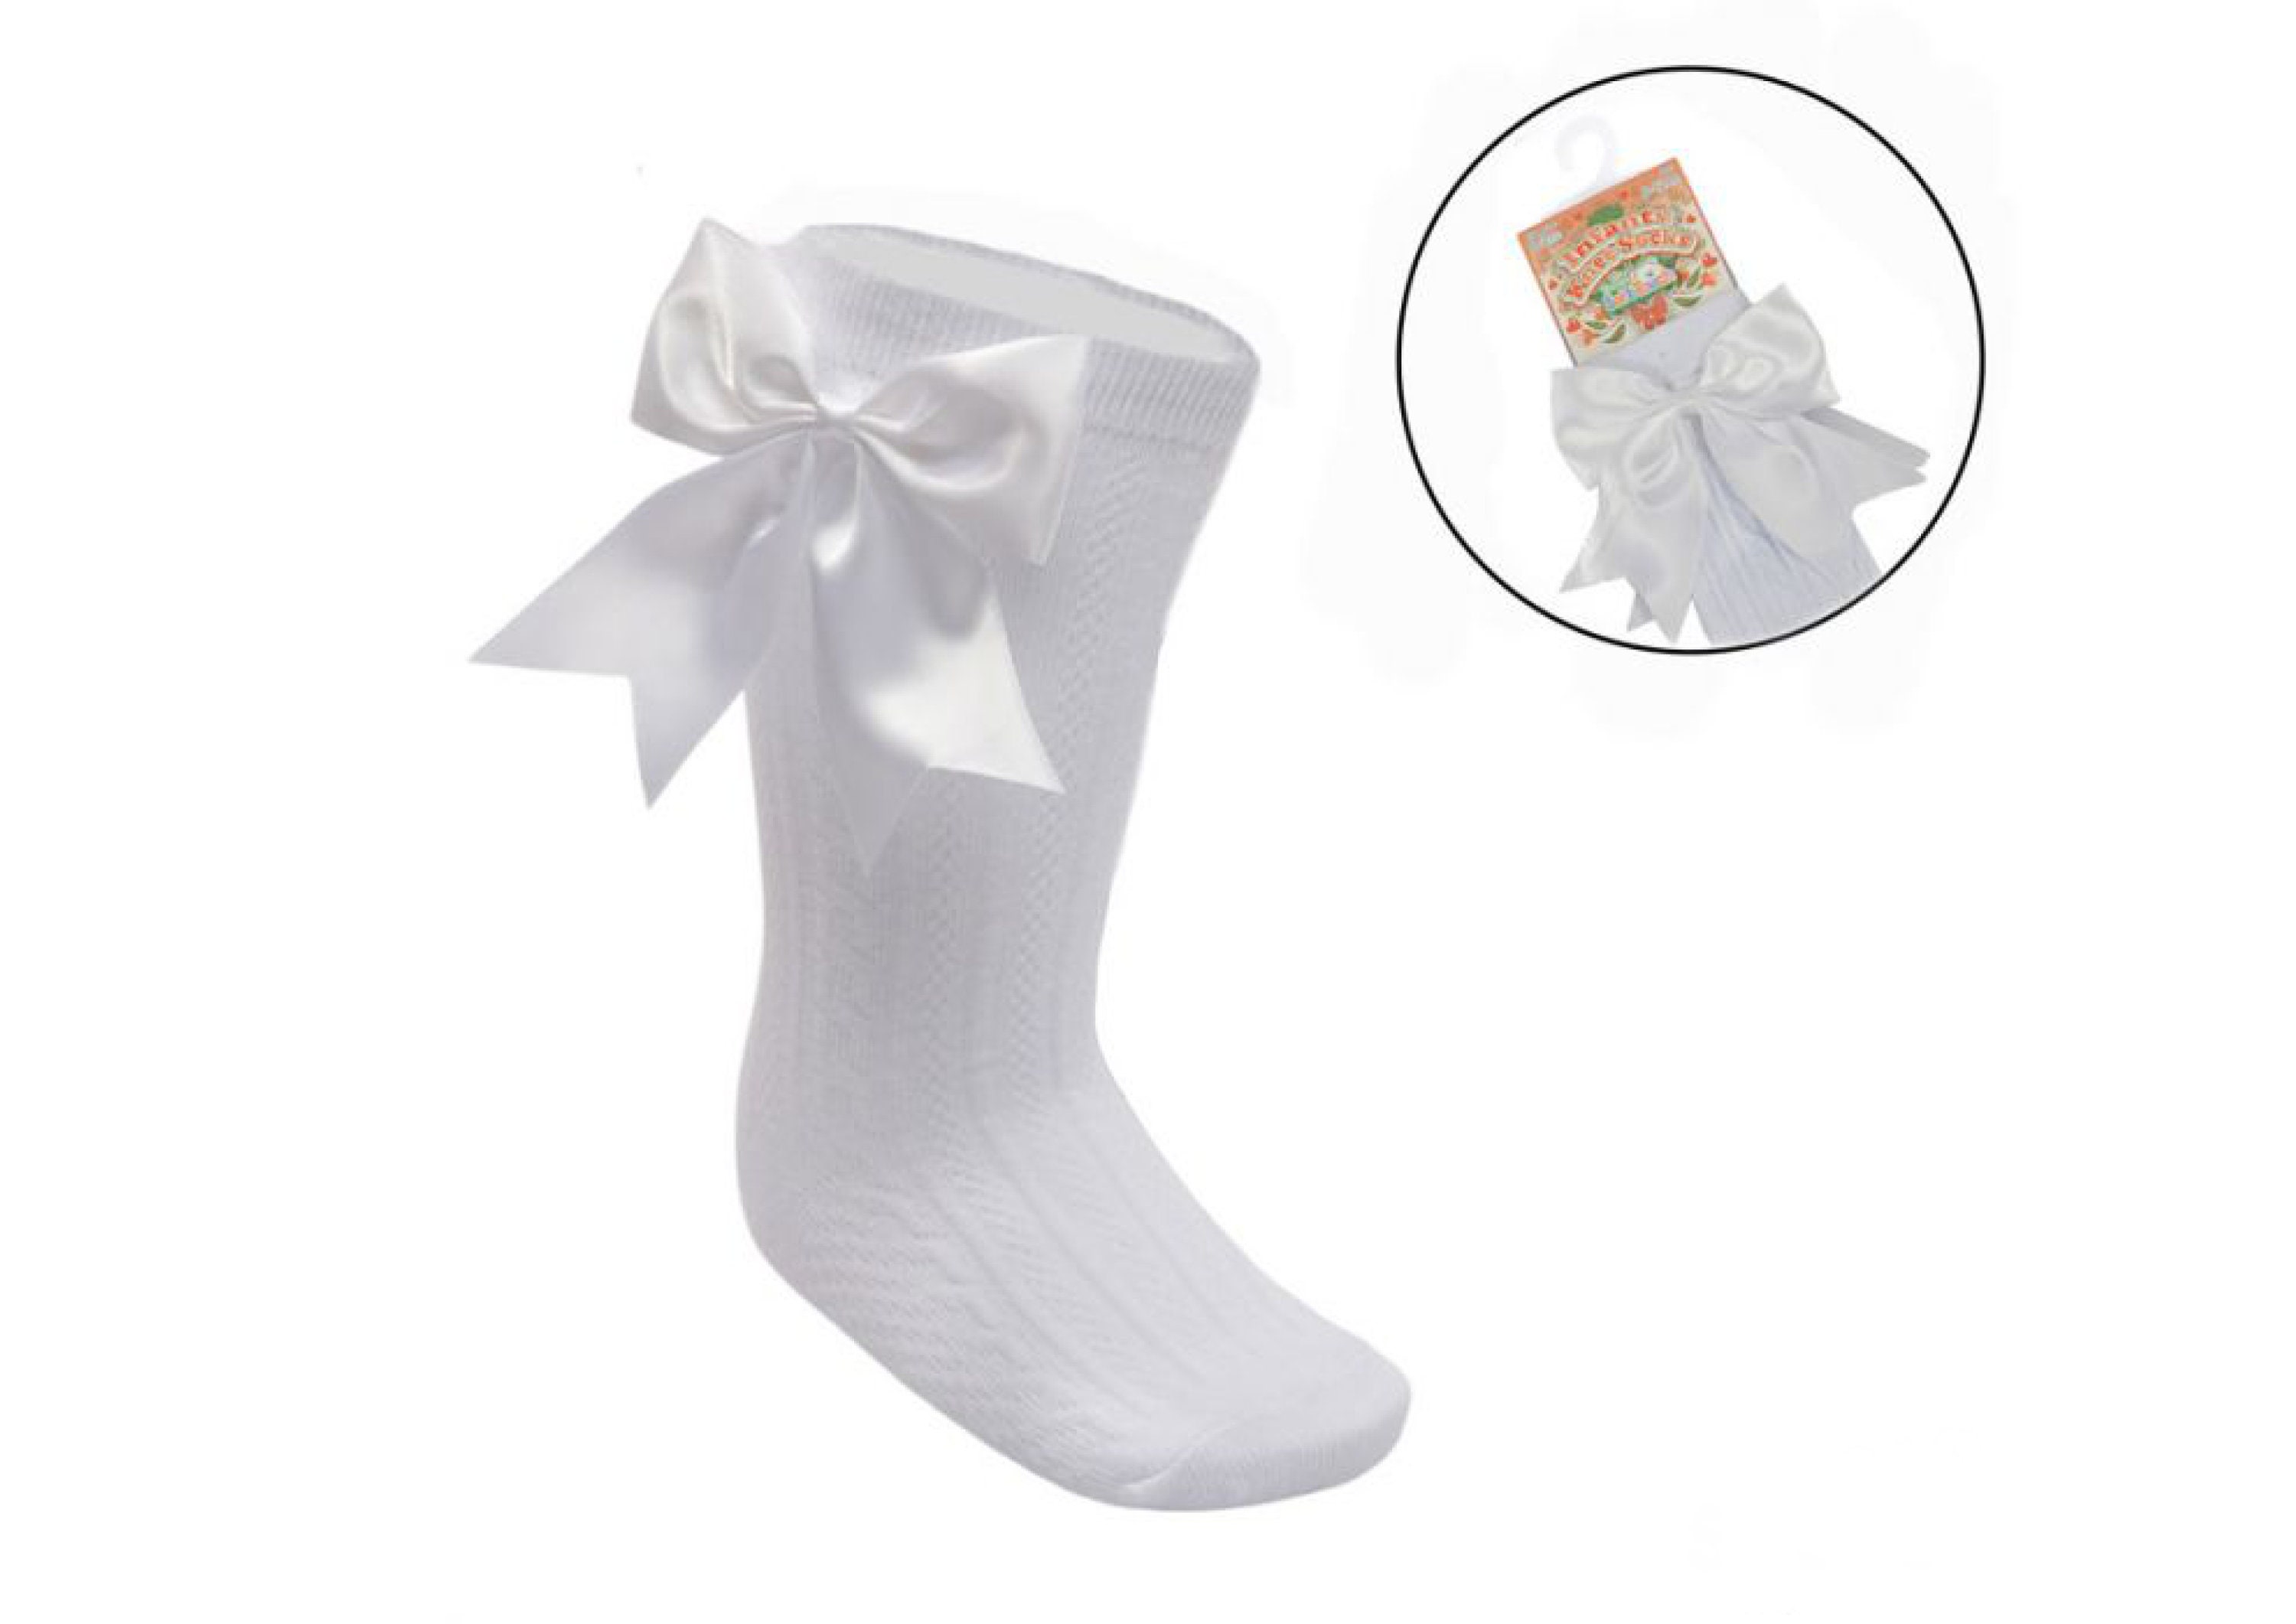 Baby Girls Socks Cotton Rich Spanish Bow Hearts Wedding Stocking High Knee Long Socks with Bows Ribbon Top Party Pom Pom Bobble Ribbed Ankle Socks Newborn 24 Months 